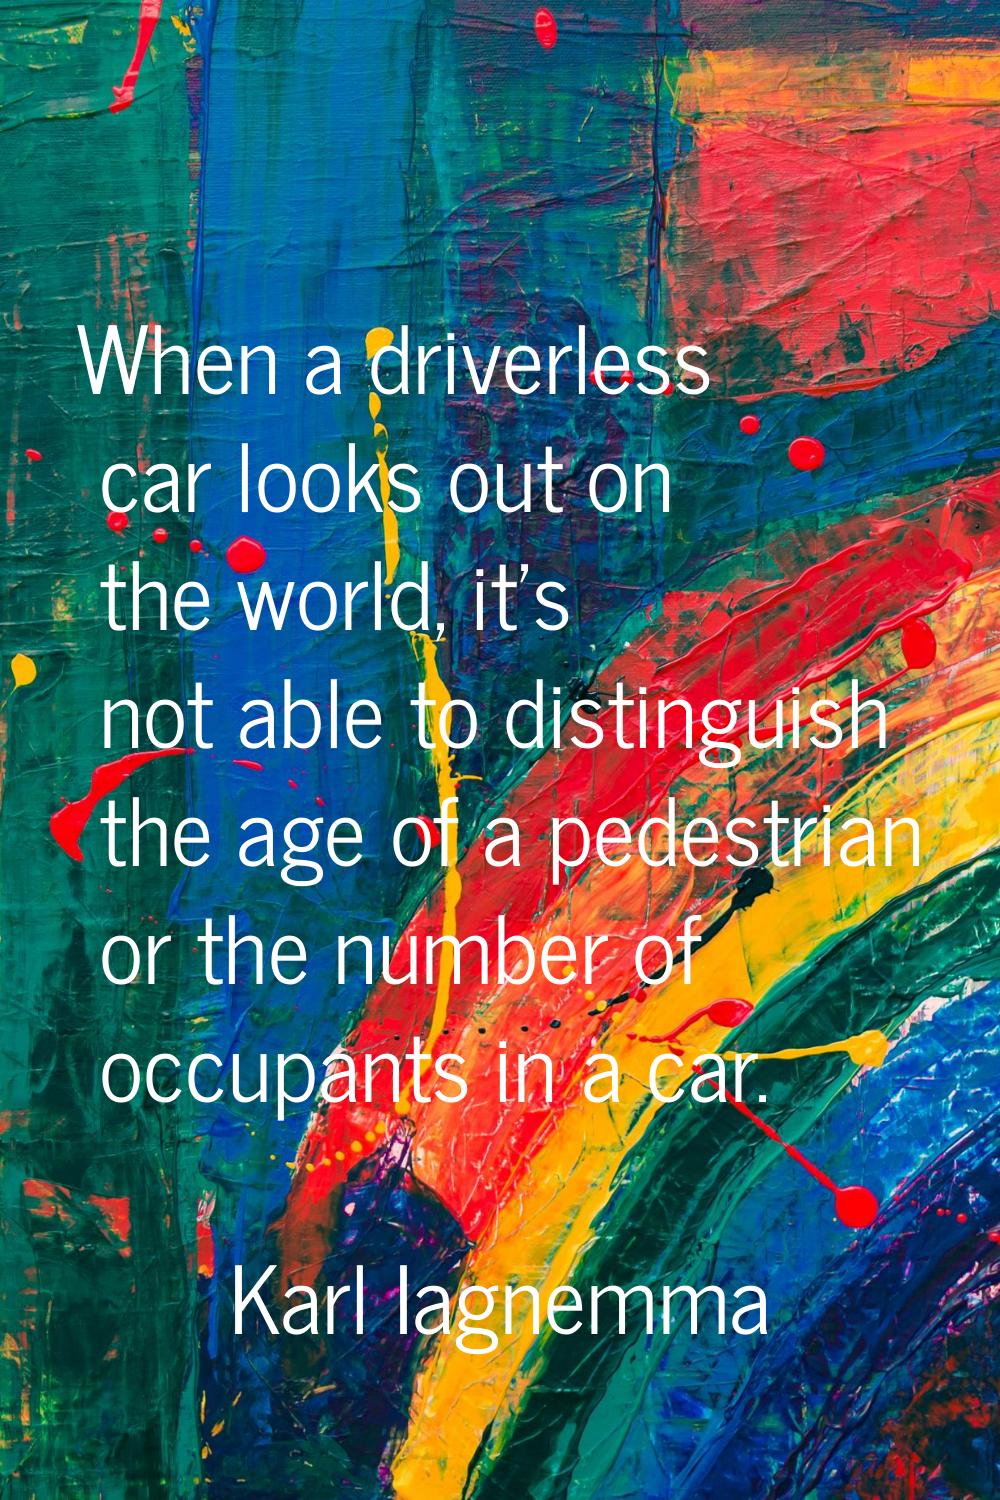 When a driverless car looks out on the world, it's not able to distinguish the age of a pedestrian 